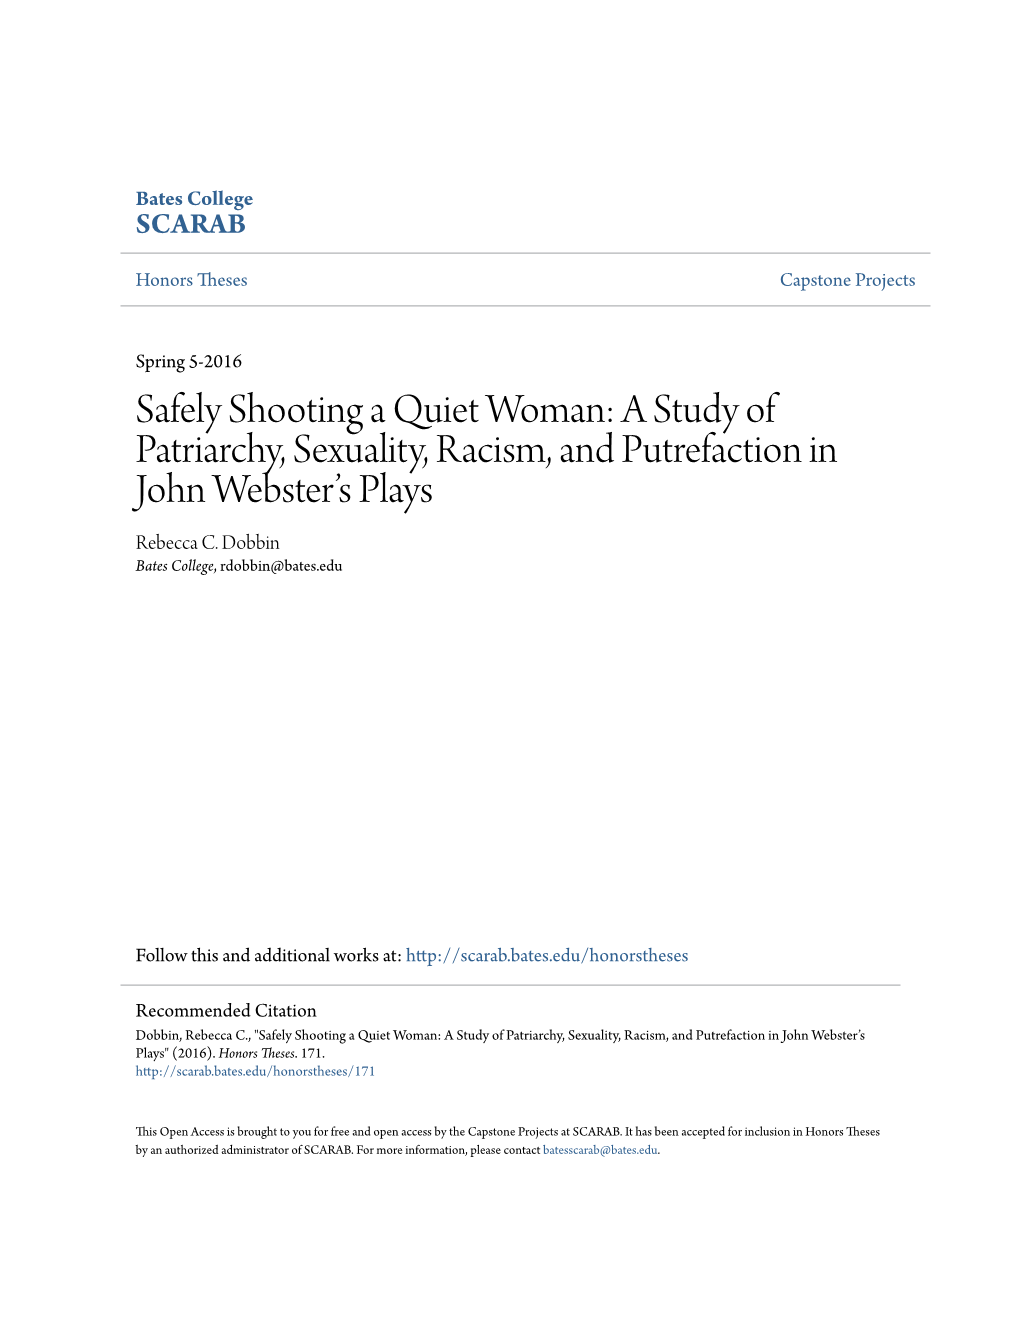 A Study of Patriarchy, Sexuality, Racism, and Putrefaction in John Webster’S Plays Rebecca C